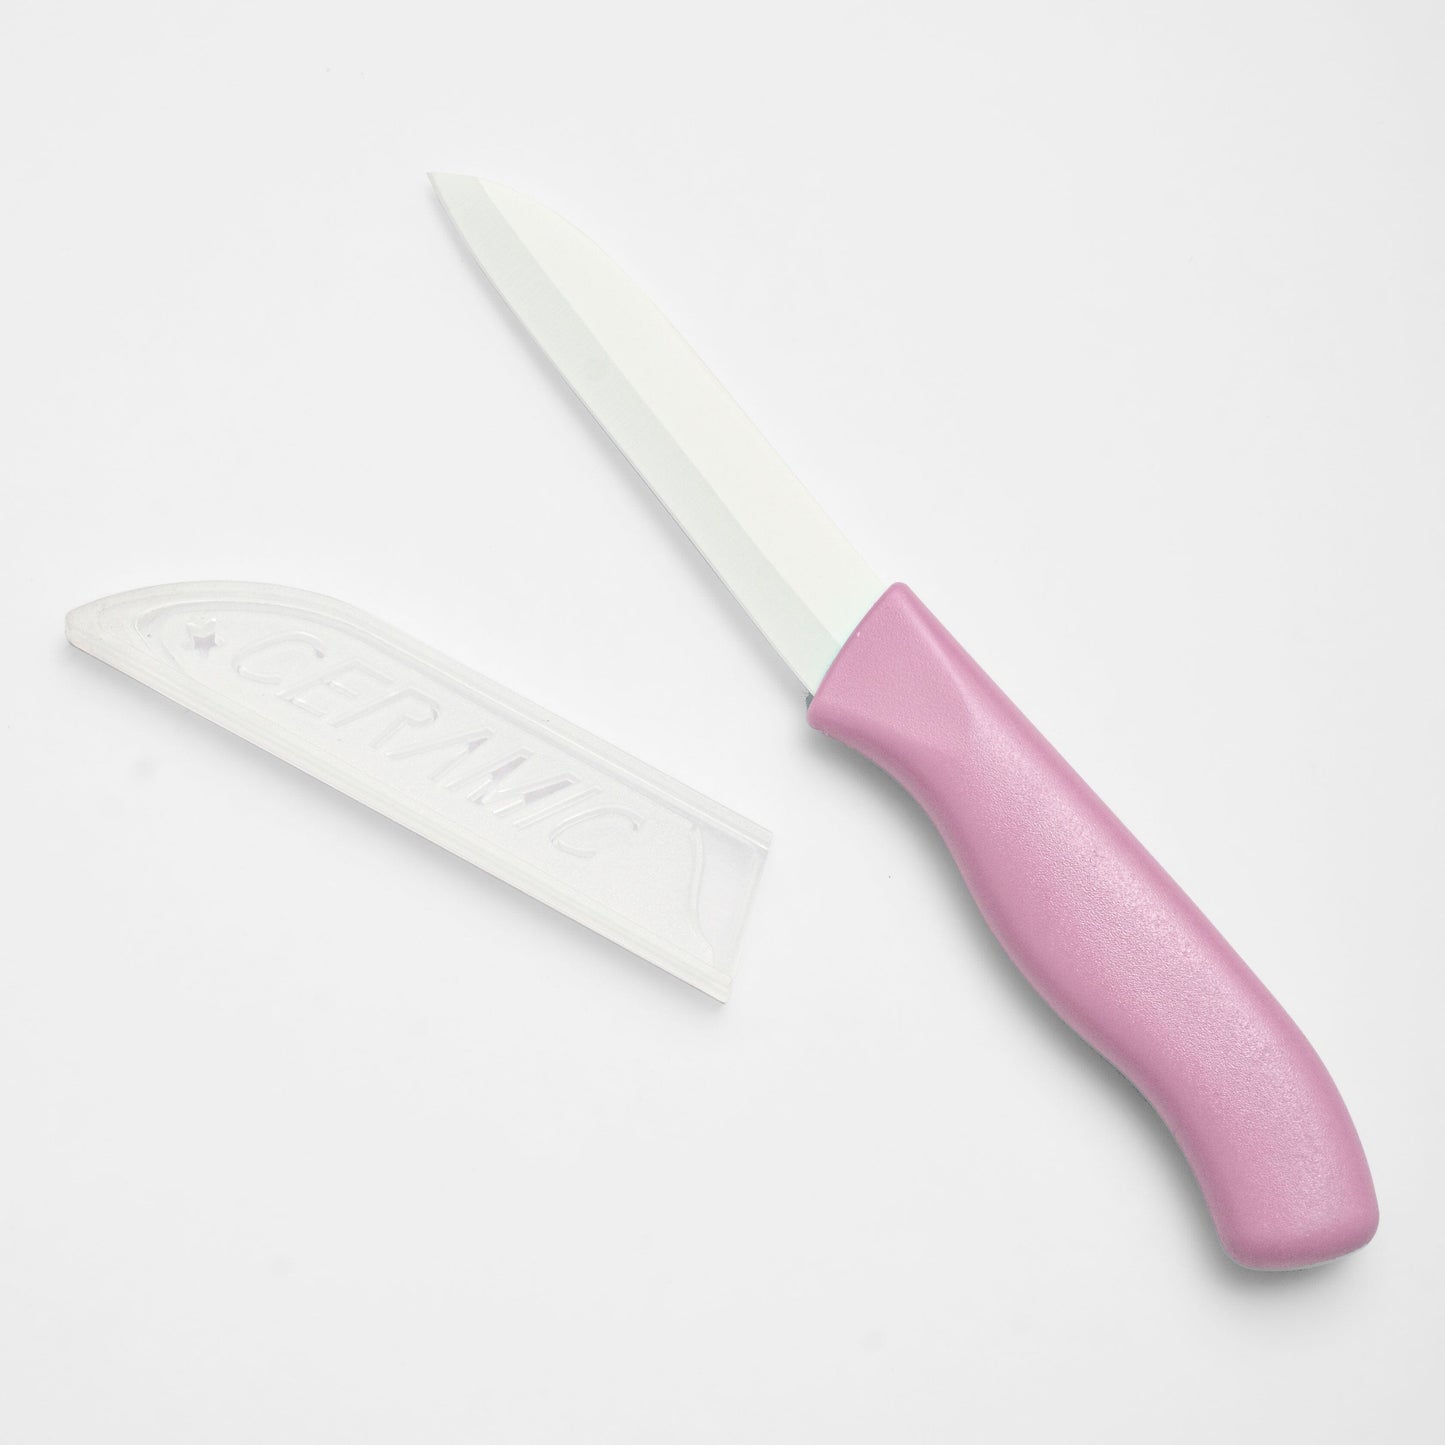 Ceramic Classic Kitchem Knife With Safety Cover Kitchen Accessories SRL Pink 